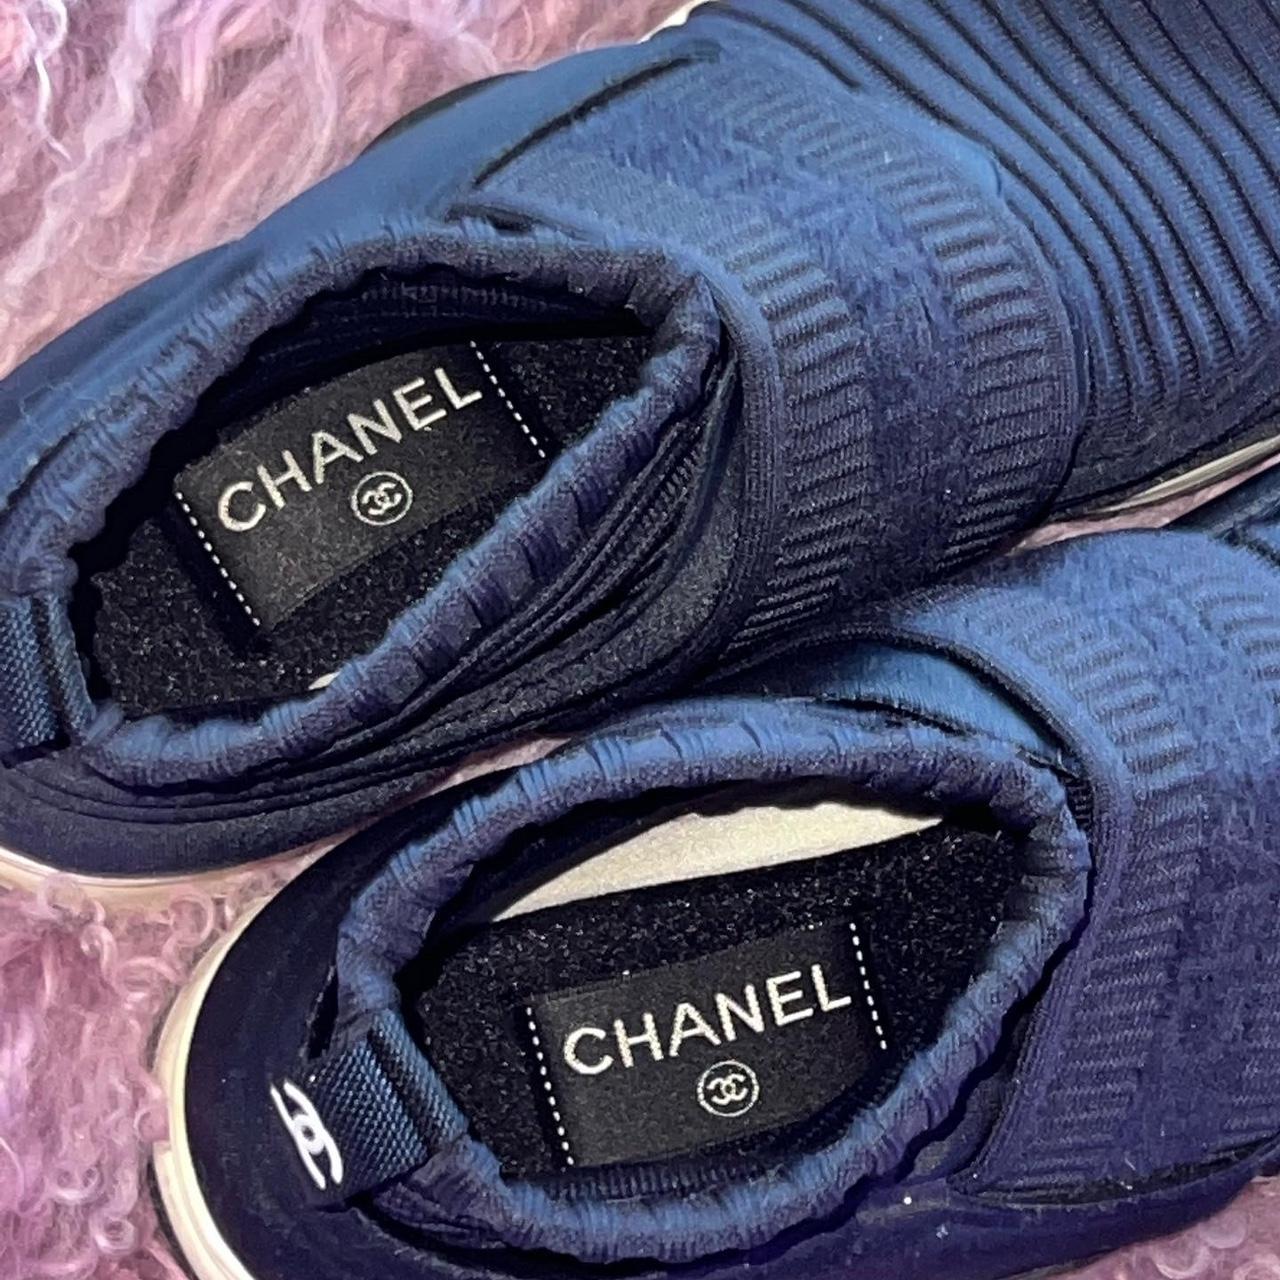 Chanel Women's Navy and Blue Trainers | Depop